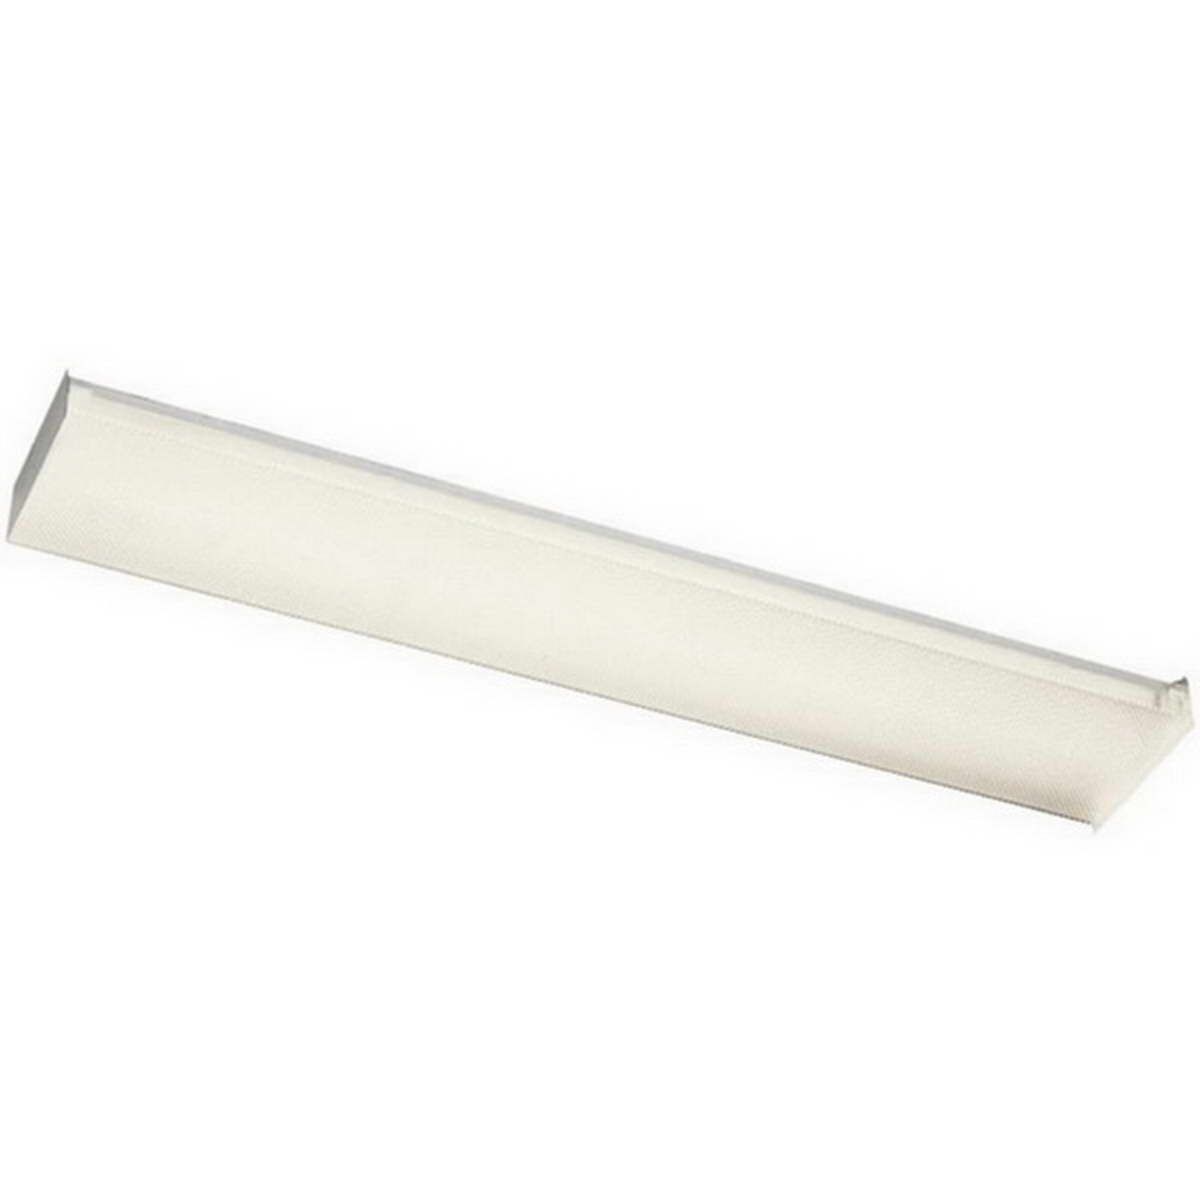 Ceiling Wrap lights 48 in. 2 Lights White finish